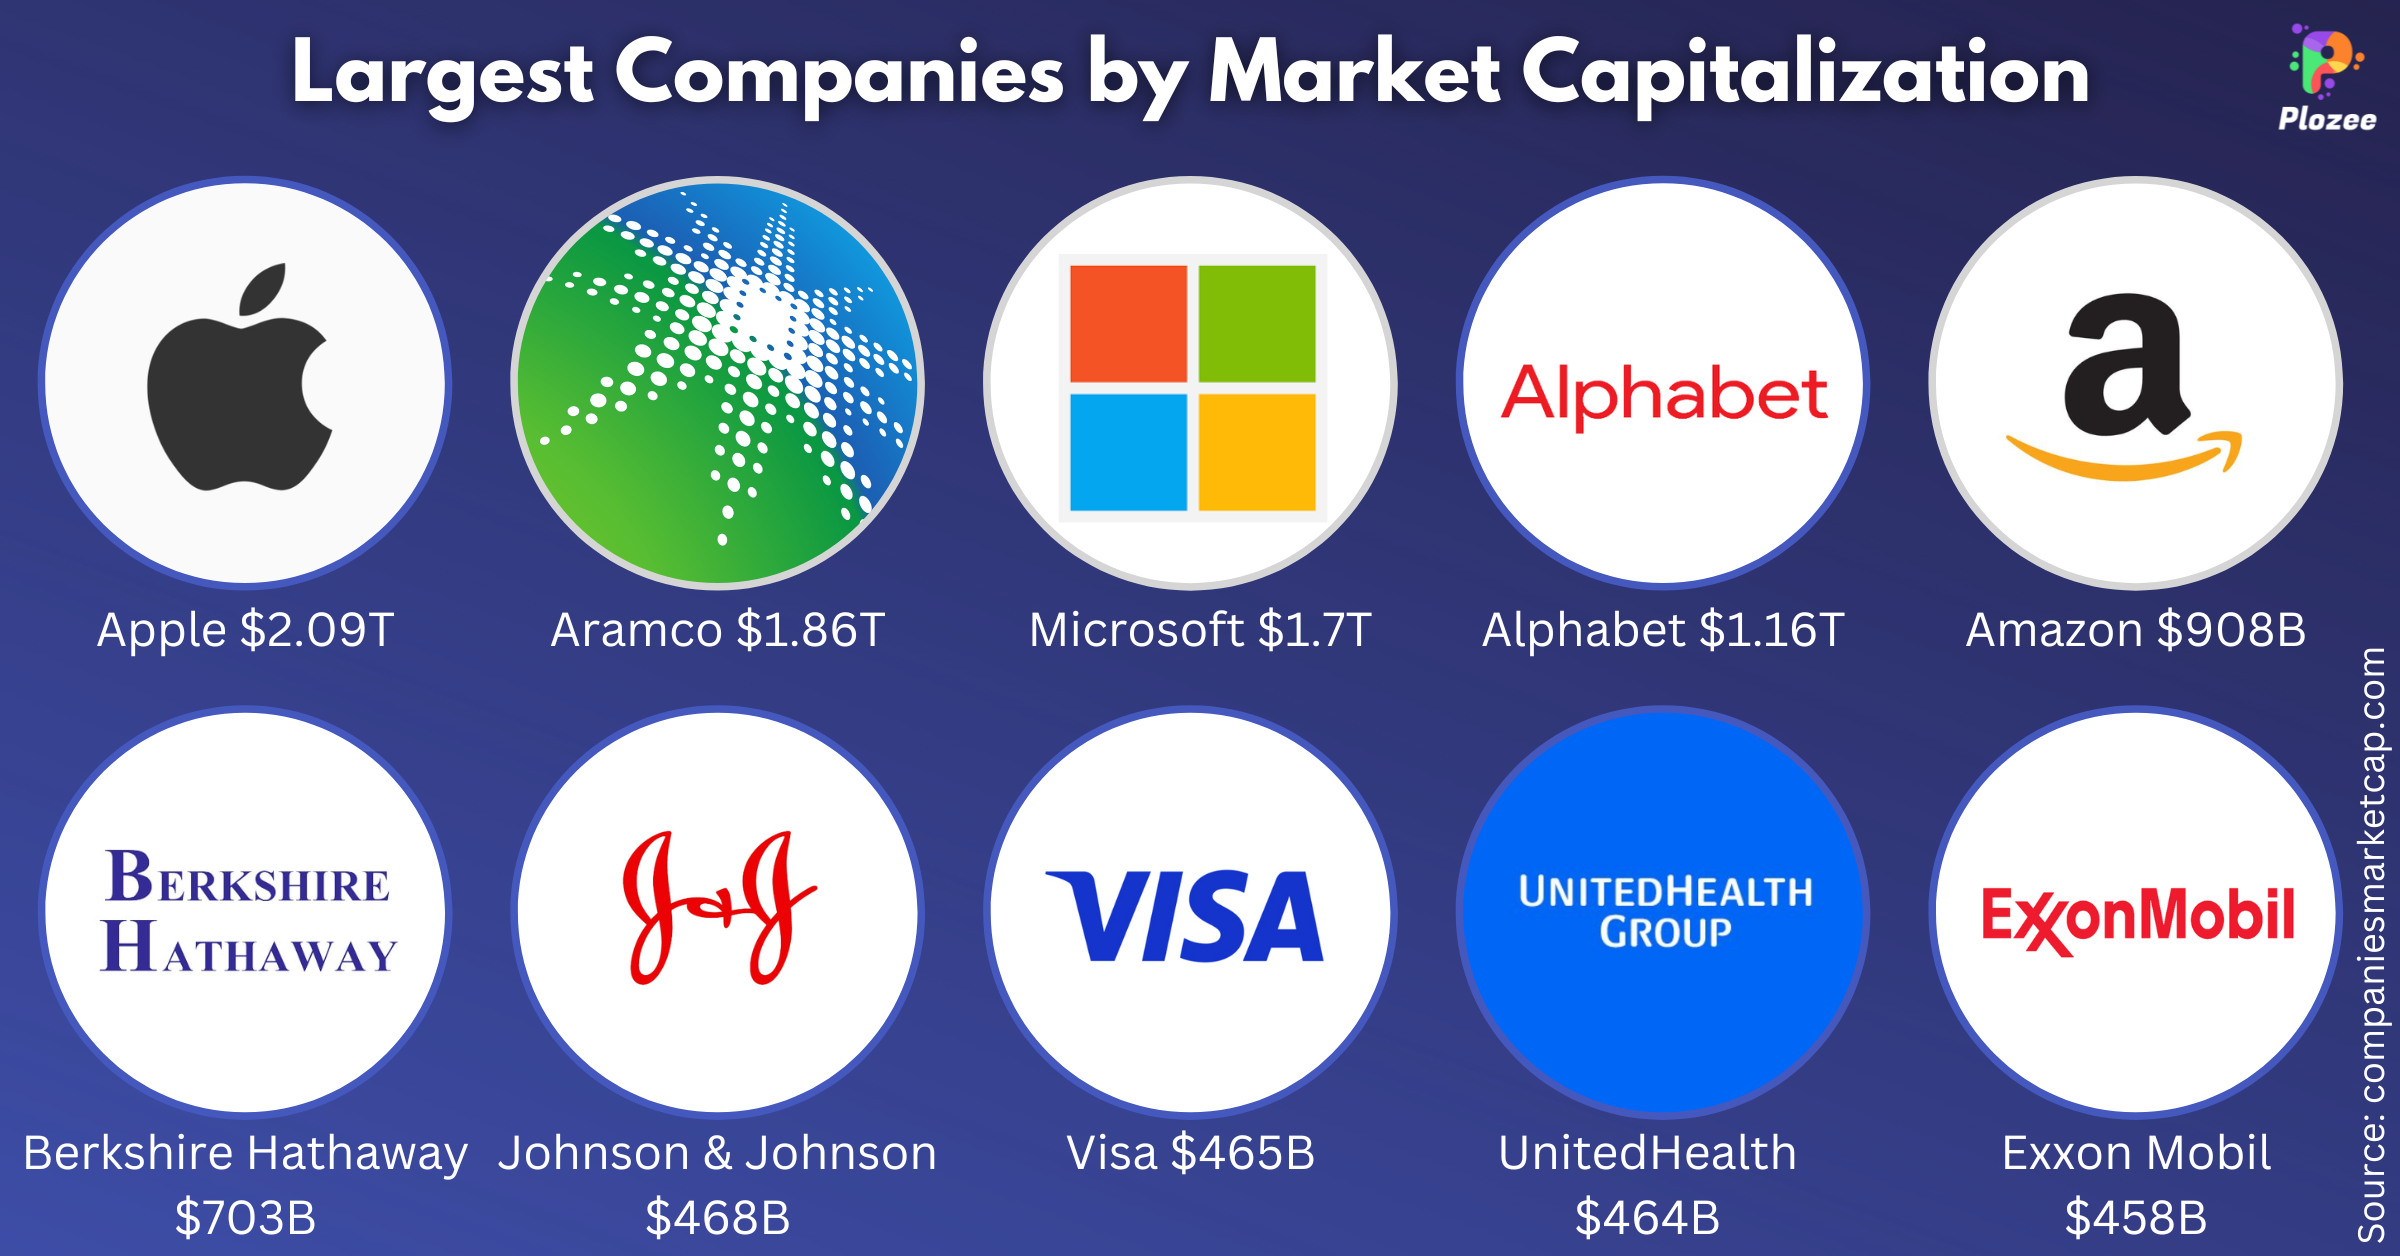 The world's largest companies by market capitalization Plozee